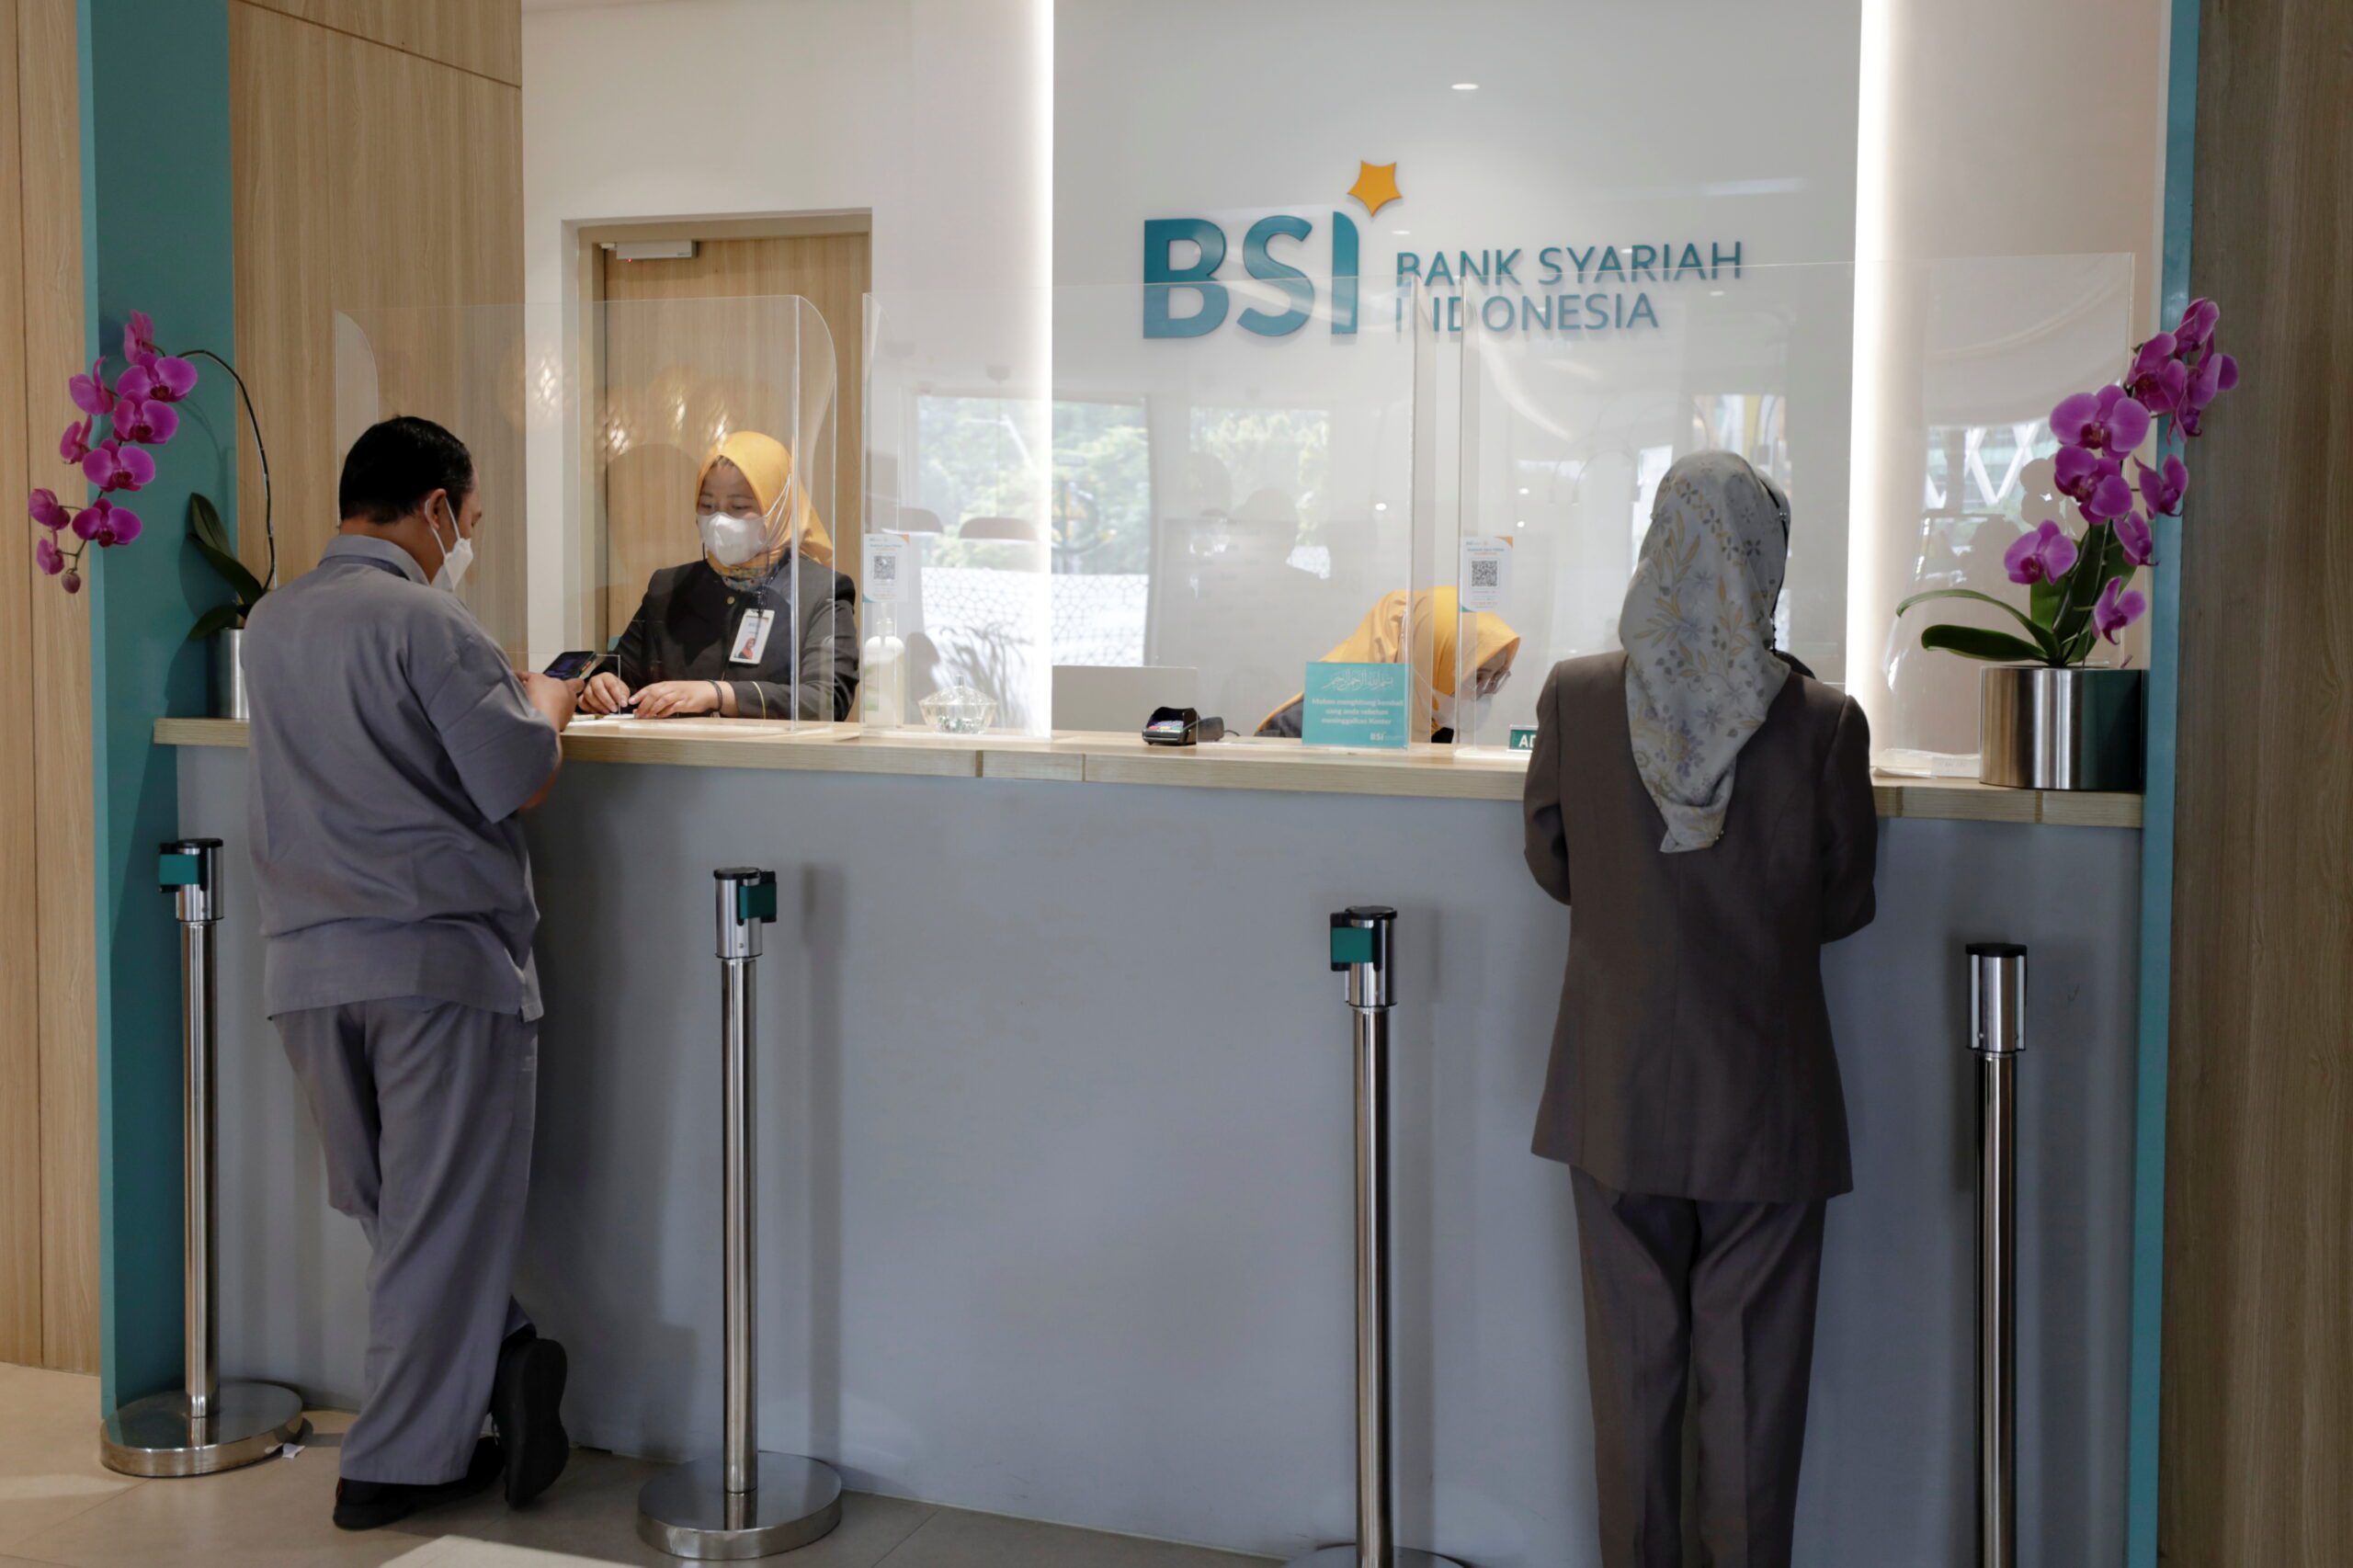 Abu Dhabi’s largest Islamic bank in talks to buy $1.1 bln stake in Indonesian lender